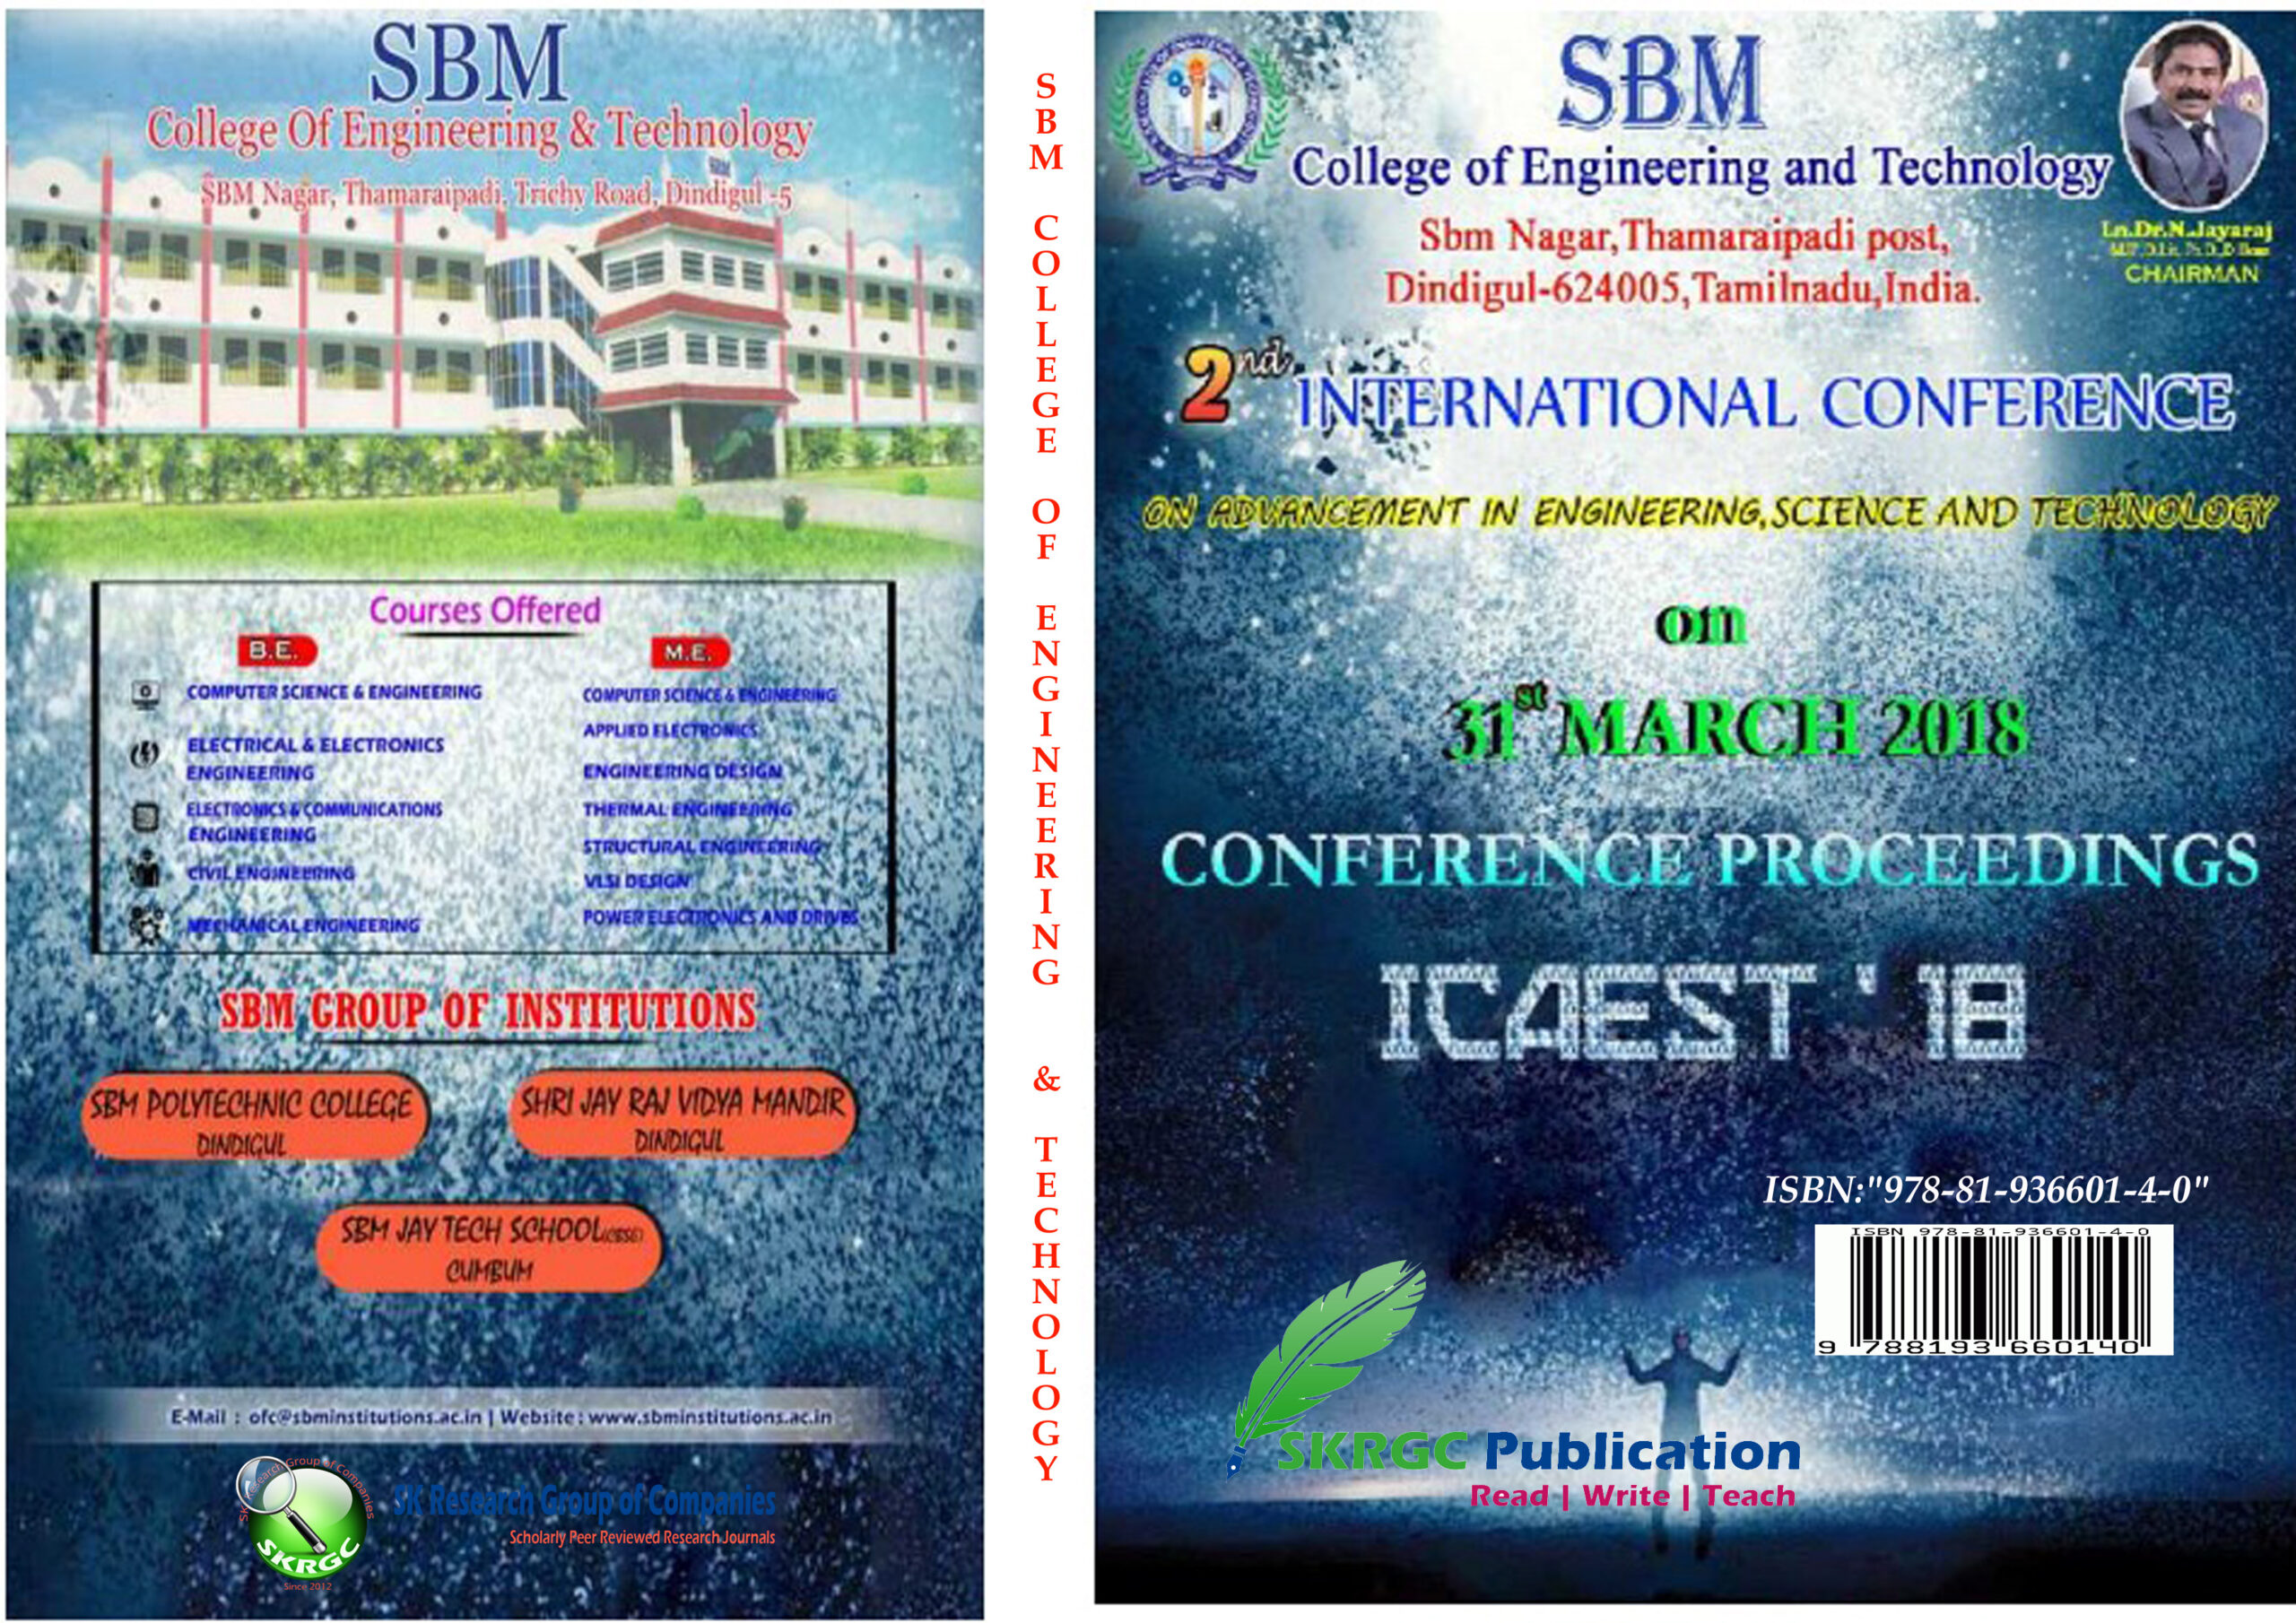 2nd International Conference on Advancement in Engineering, Science and Technology ICAEST 18